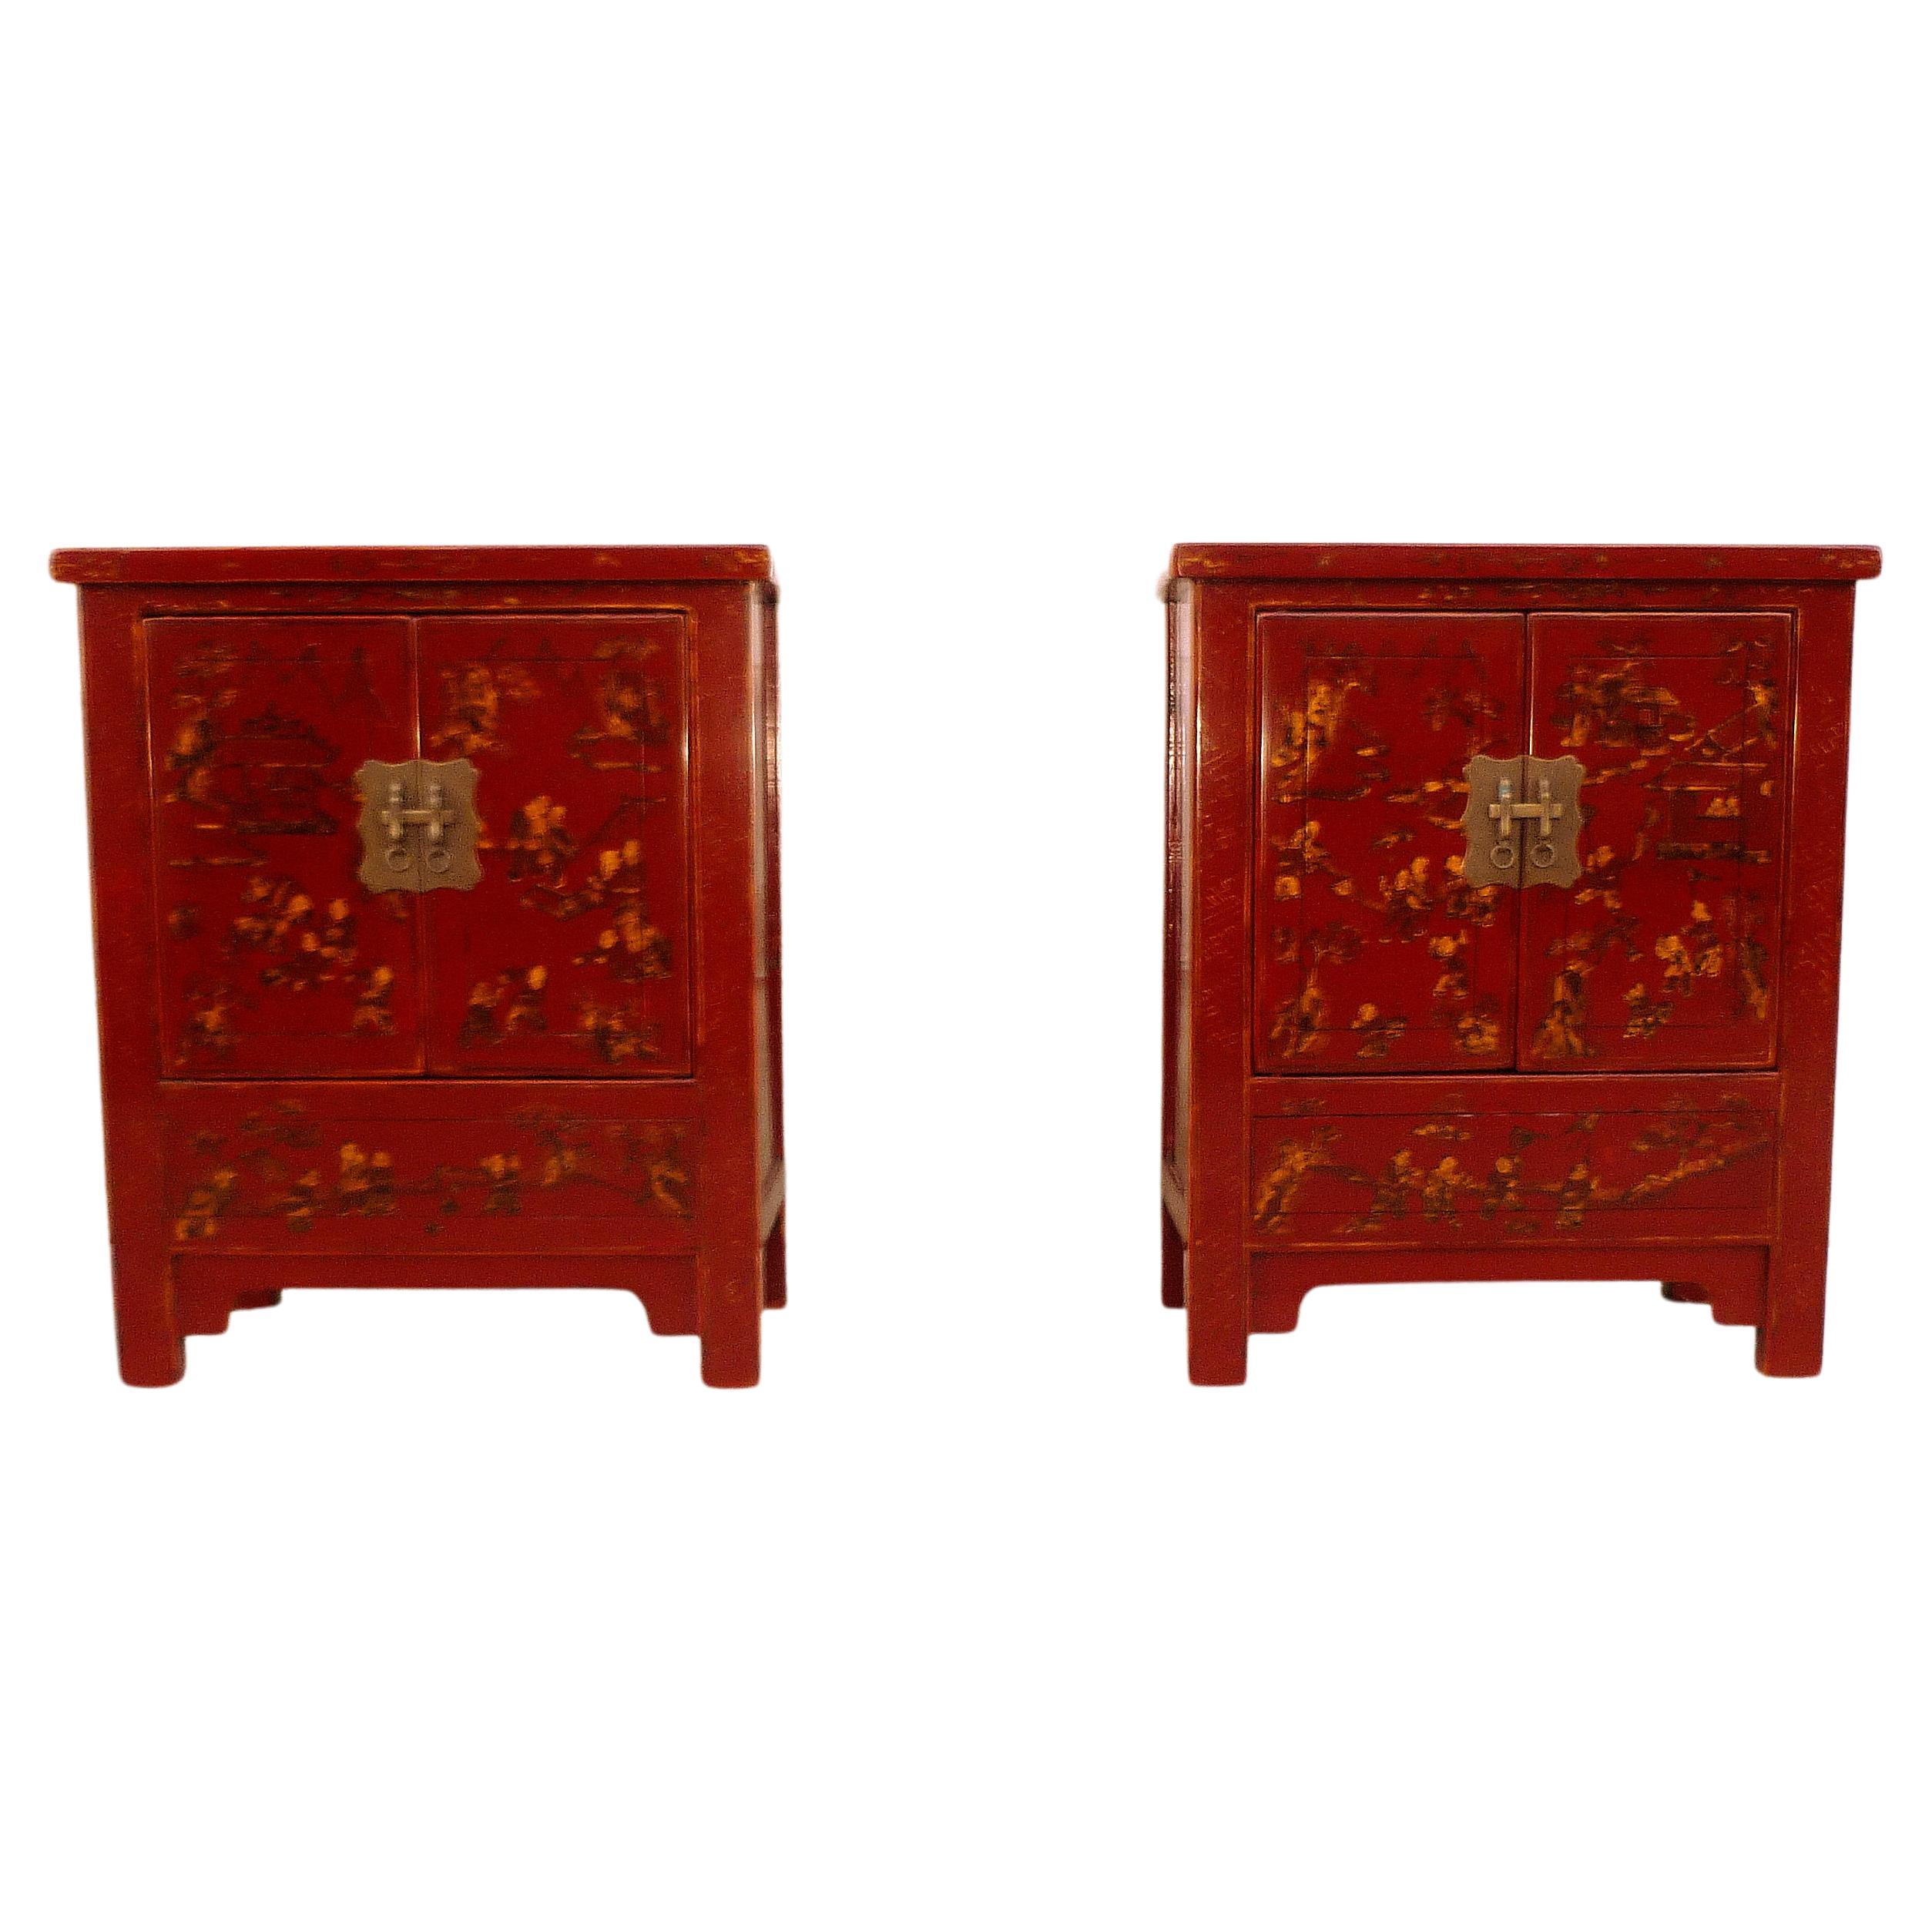 Pair of Fine Red Lacquer Chests with Gilt Motif